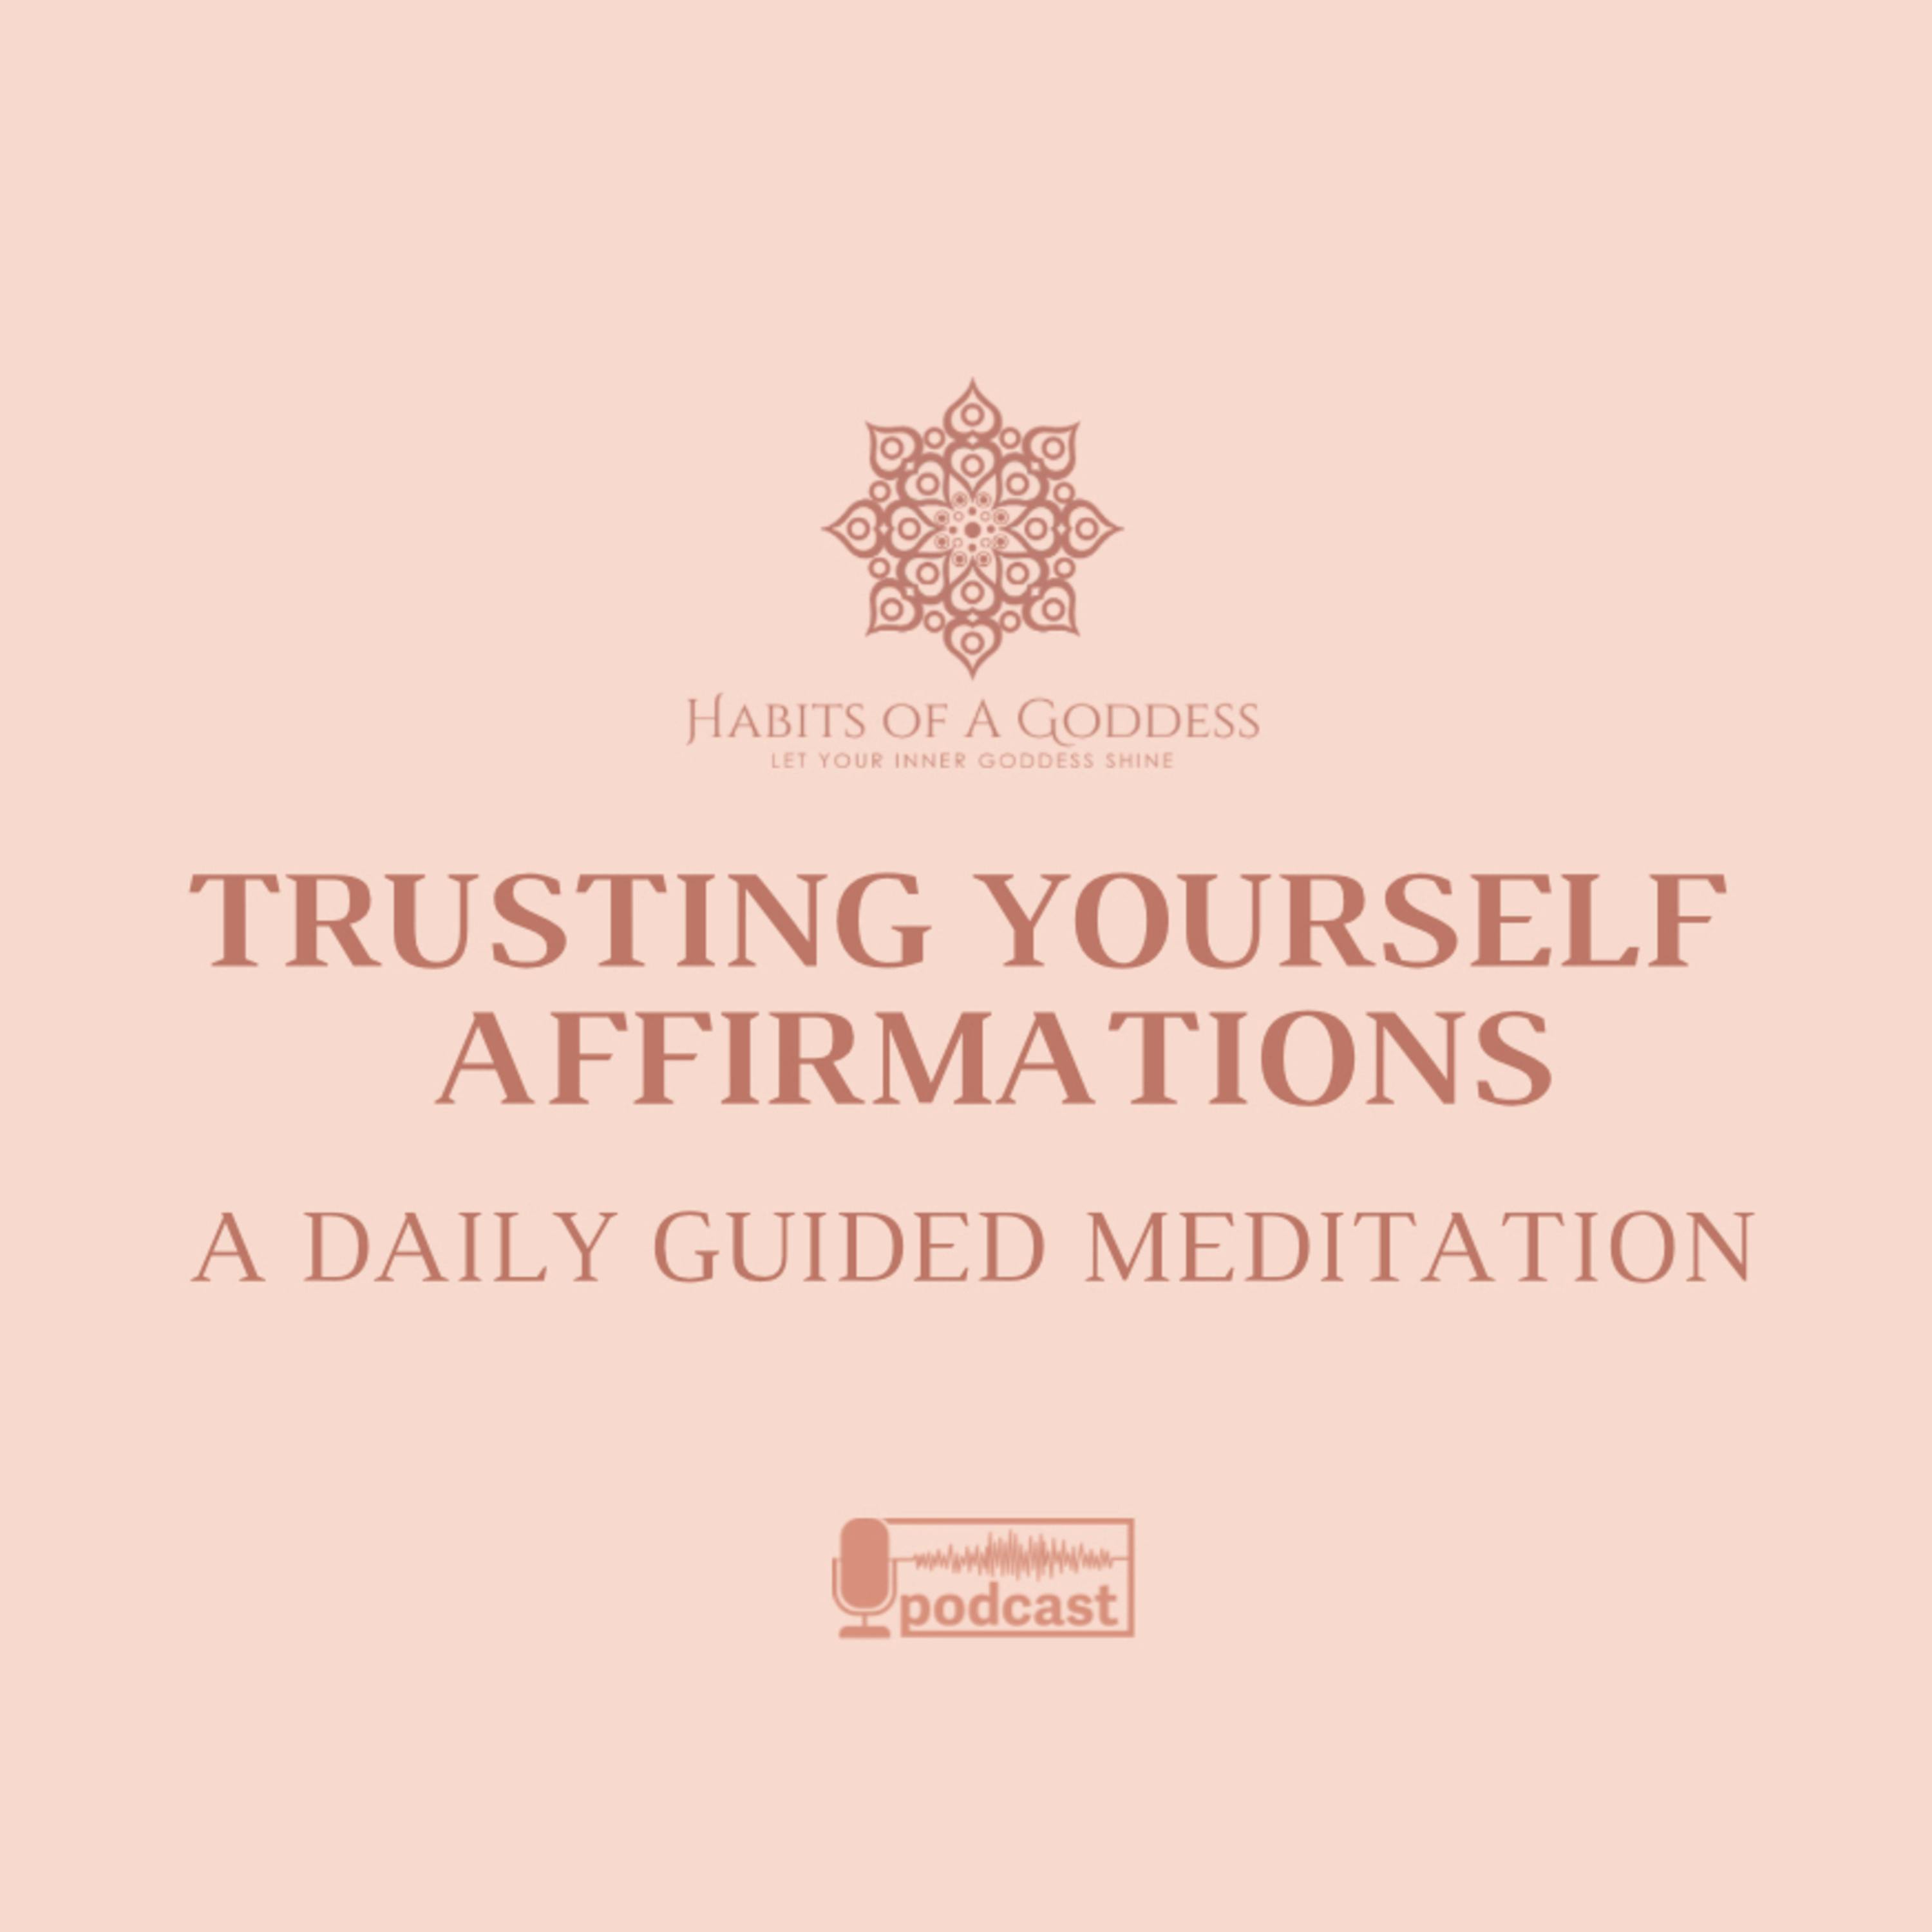 TRUSTING YOURSELF AFFIRMATIONS | HABITS OF A GODDESS